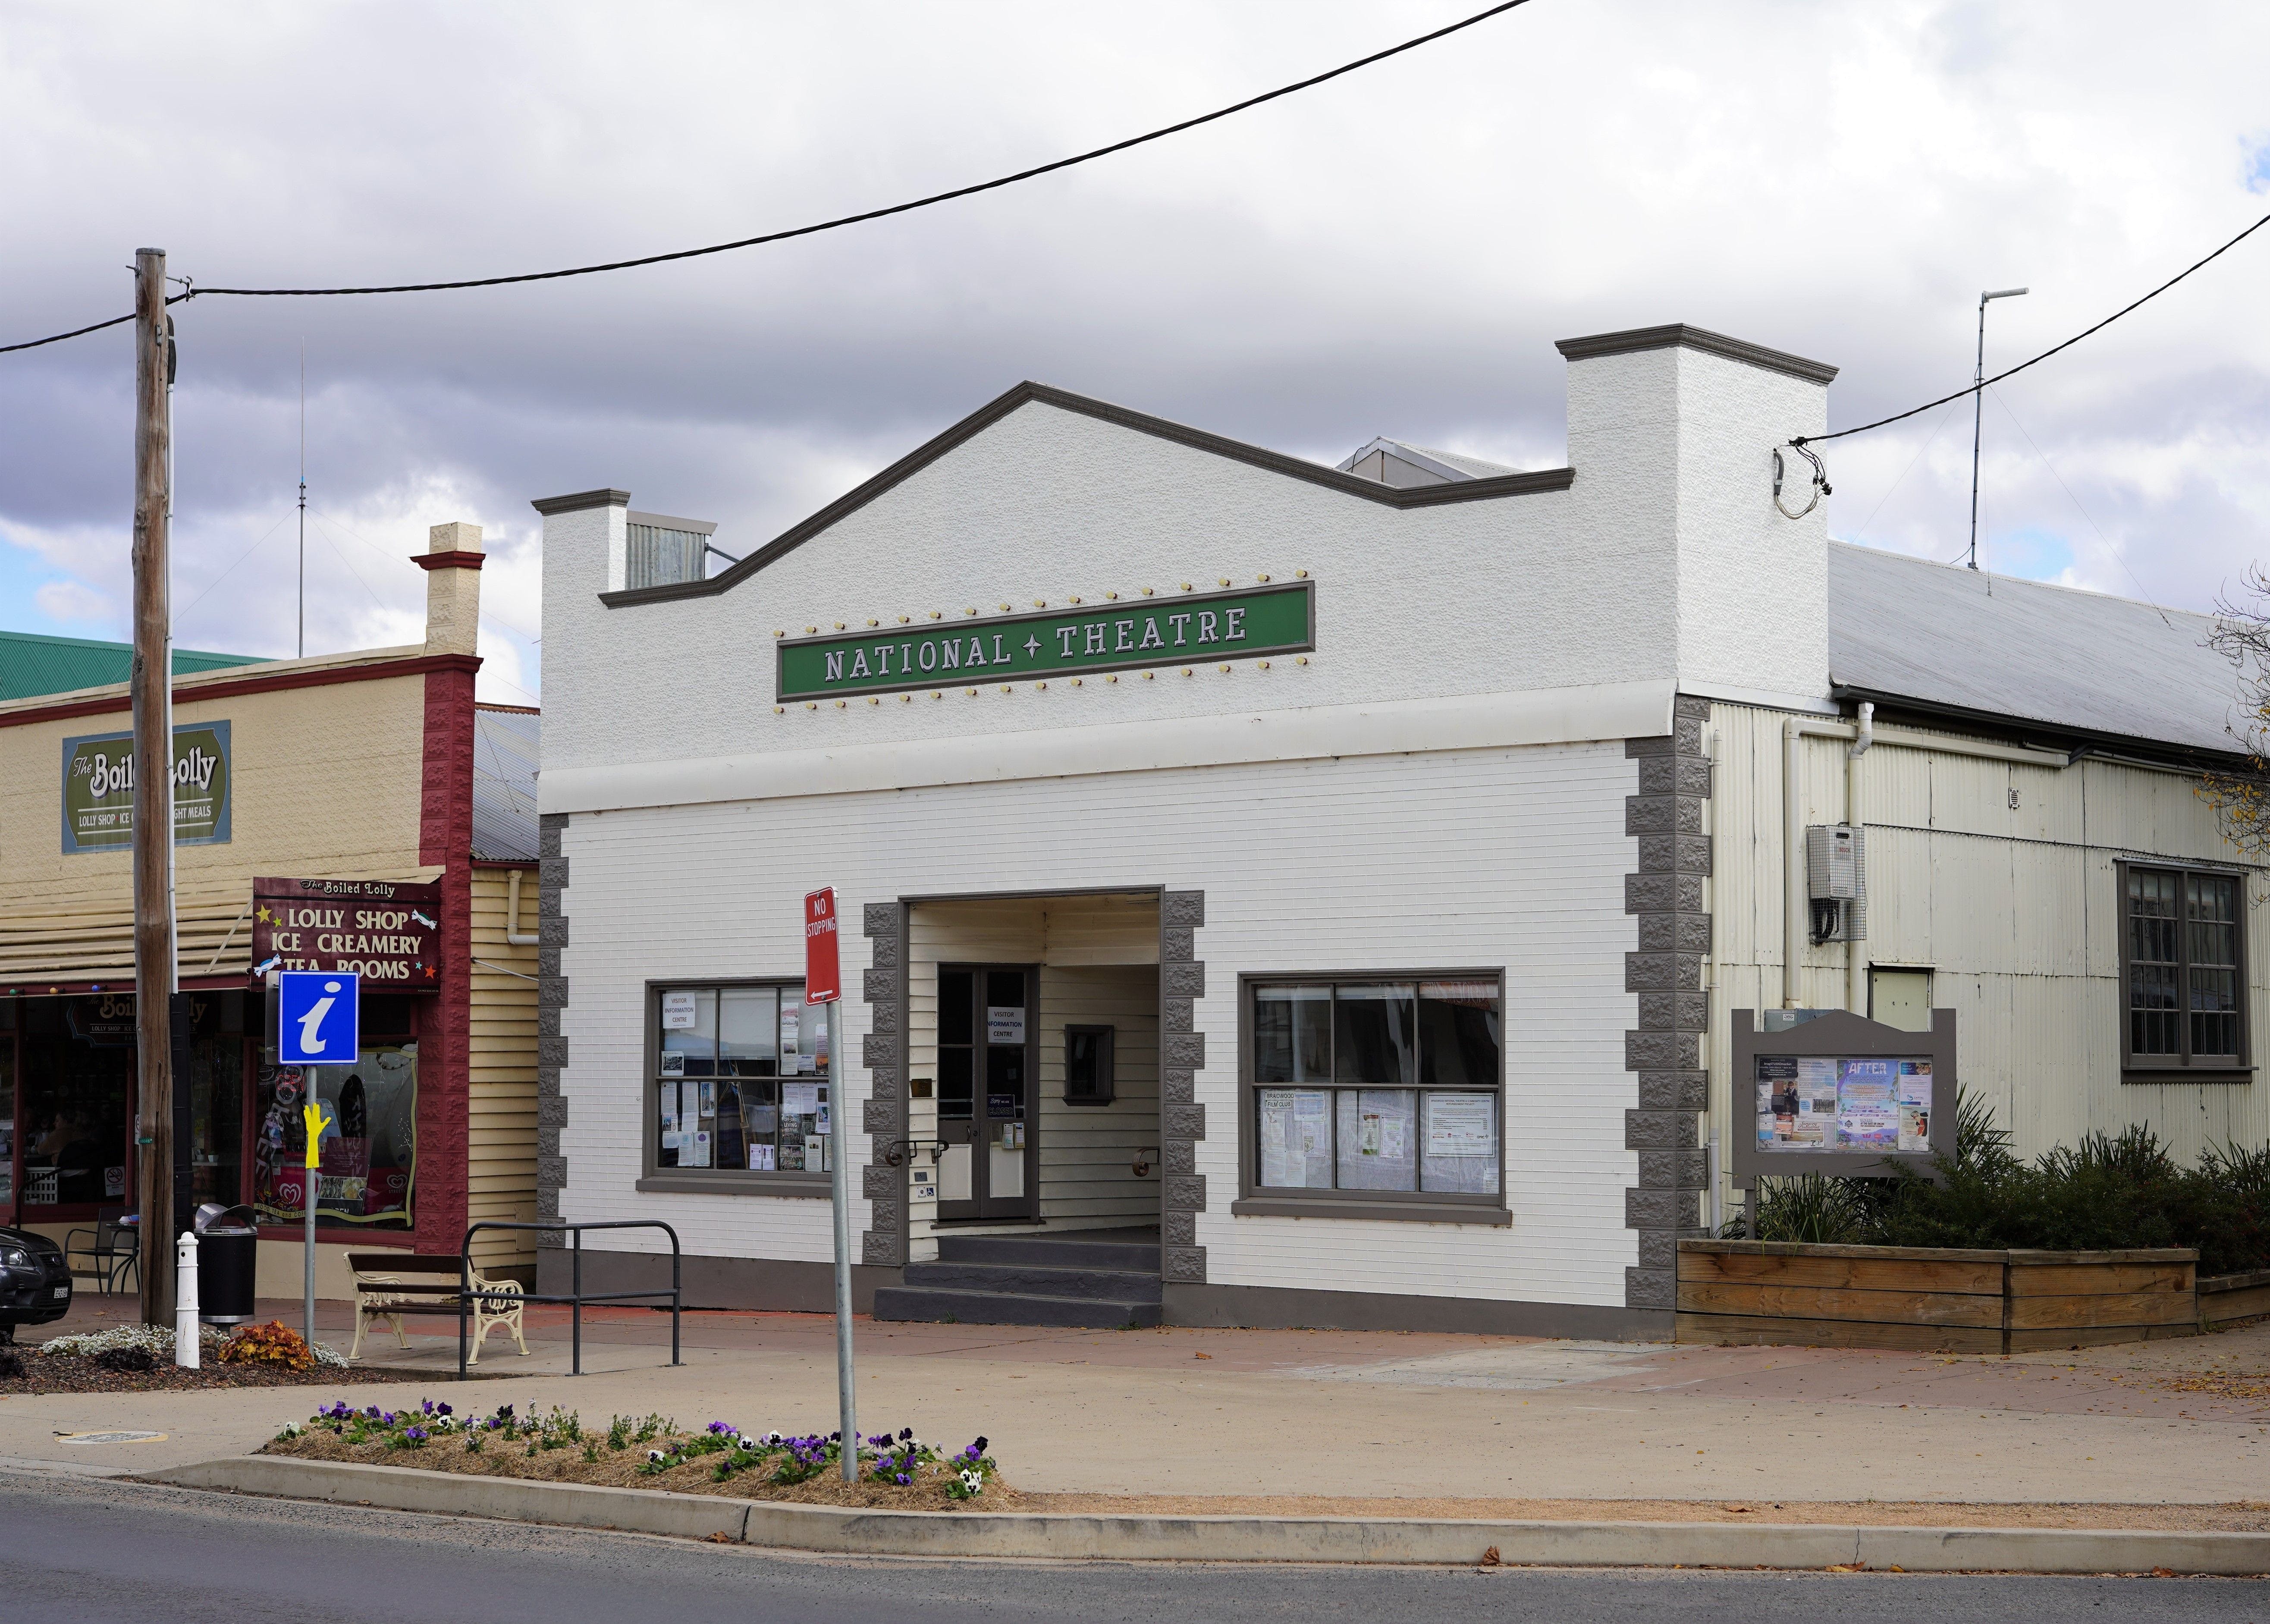 Braidwood Visitors Information Centre at the Theatre - Hotel Accommodation